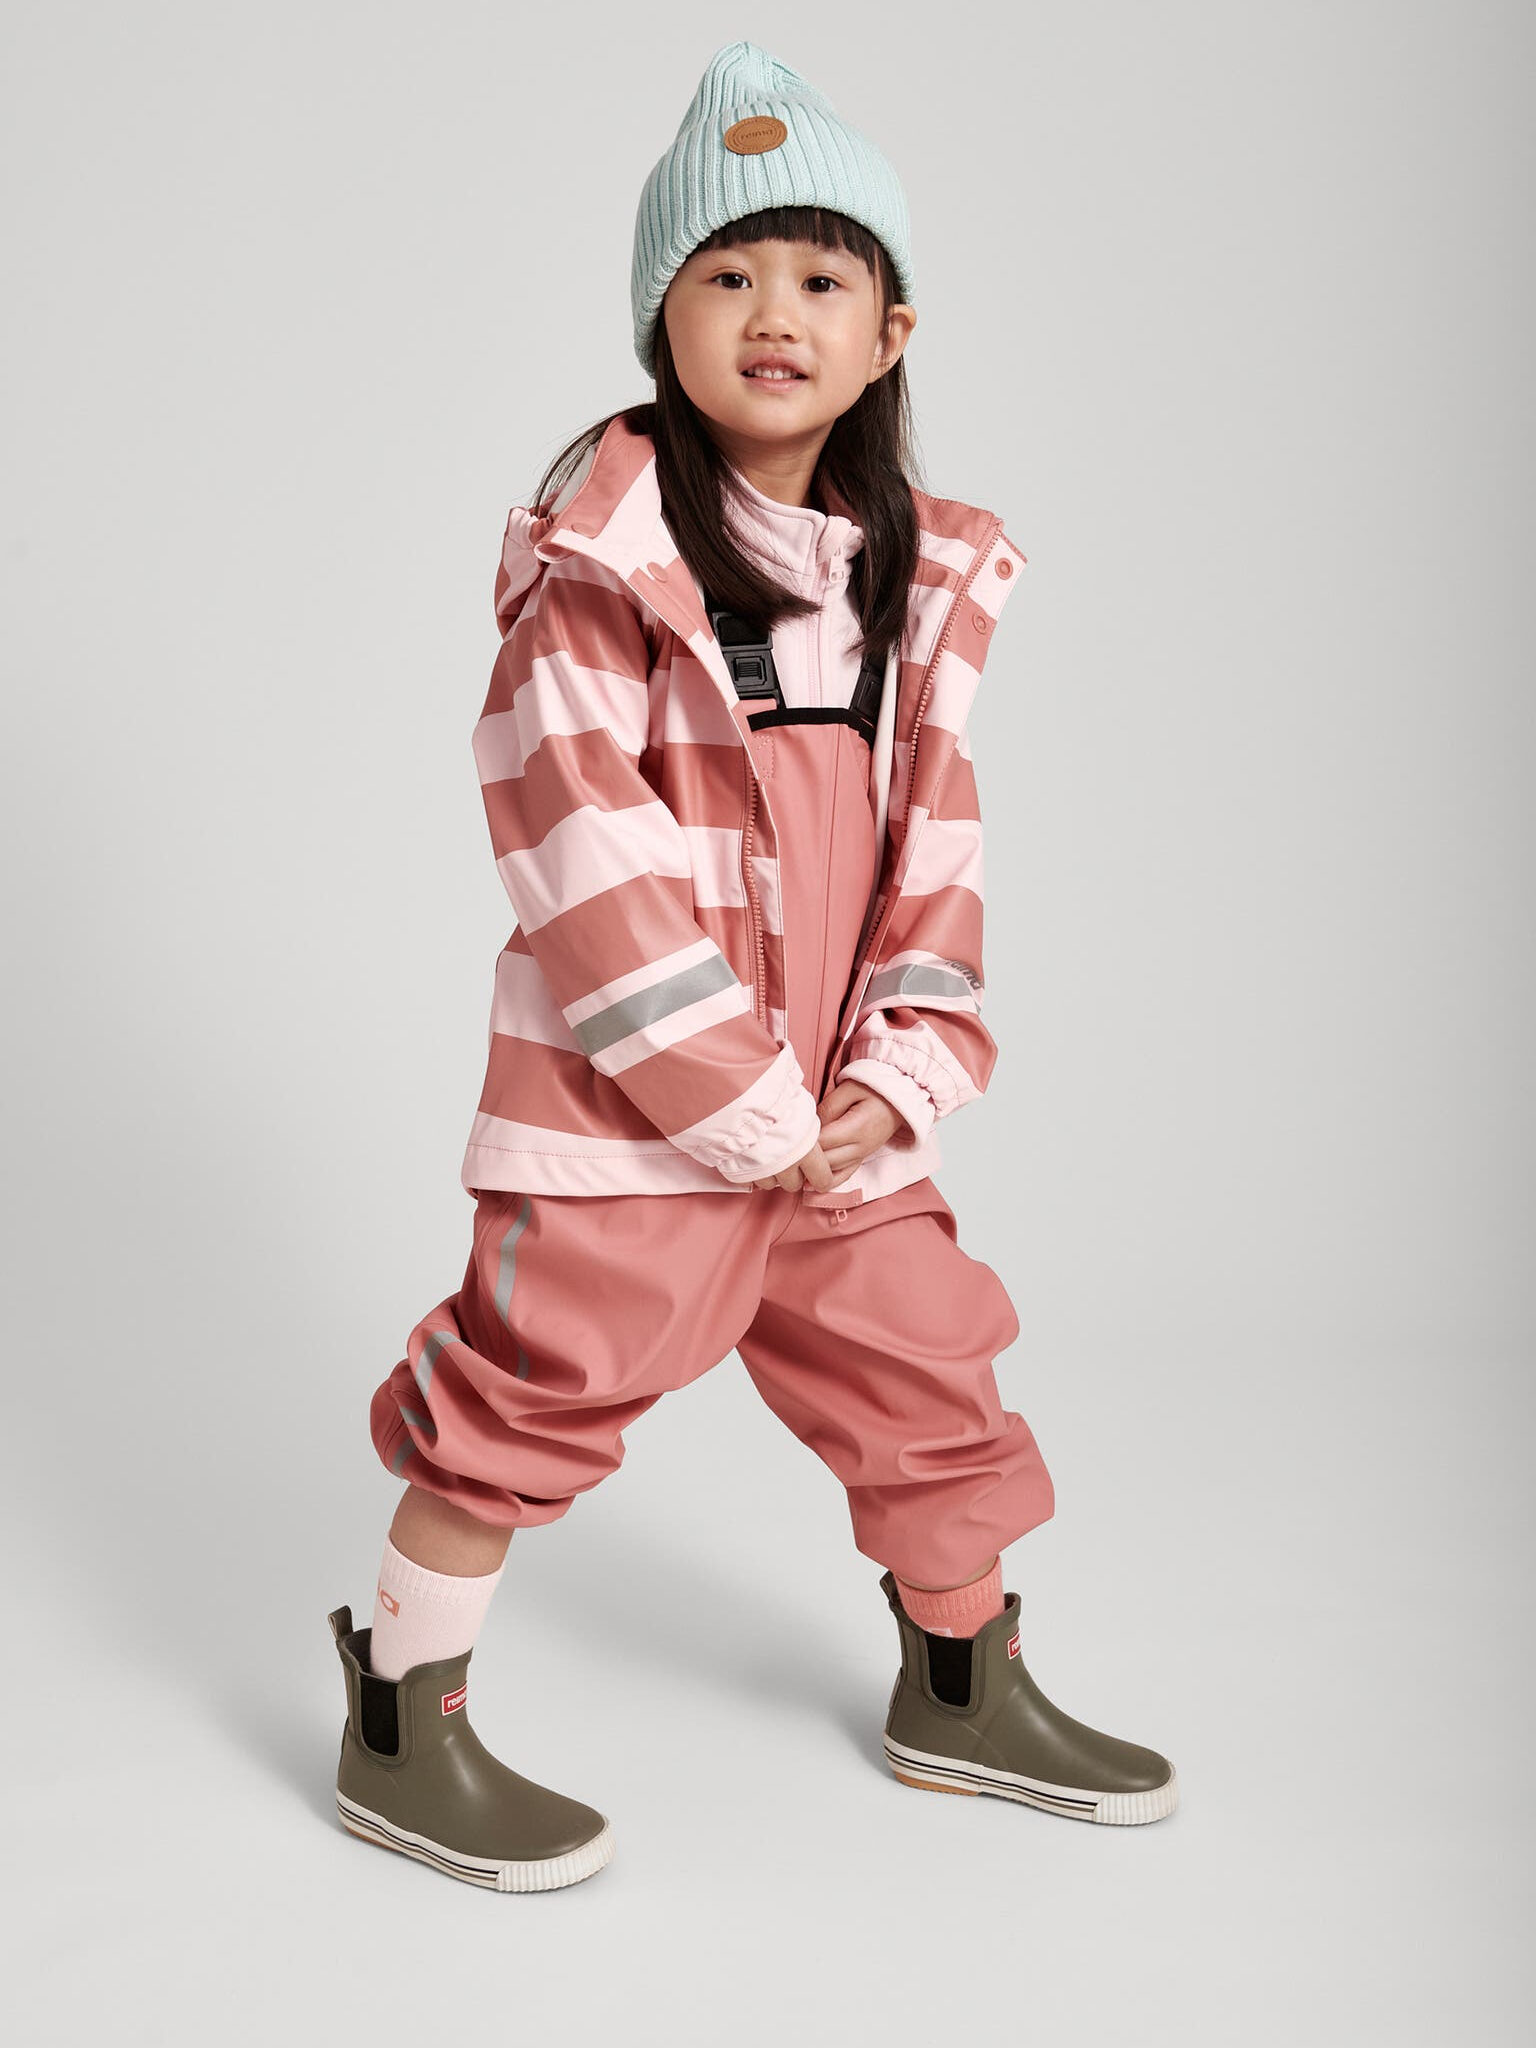 A little girl wearing a pink striped raincoat and hat.